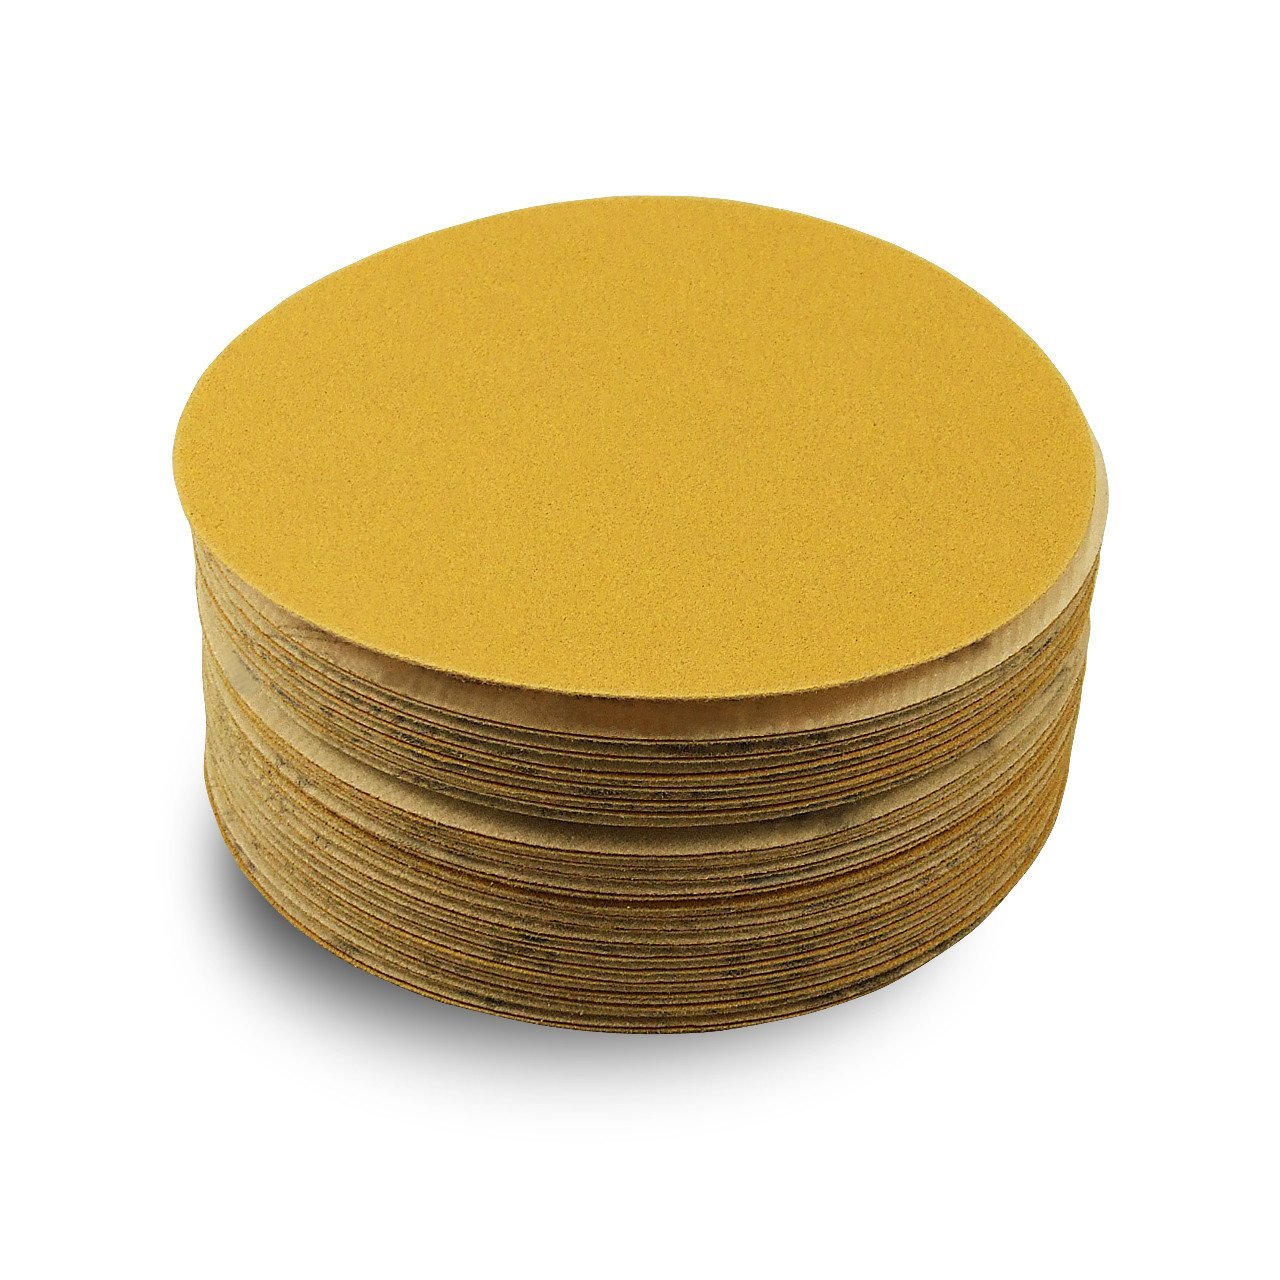 6 Inch Hook and Loop Gold Sanding Discs, 50 Pack - Red Label Abrasives